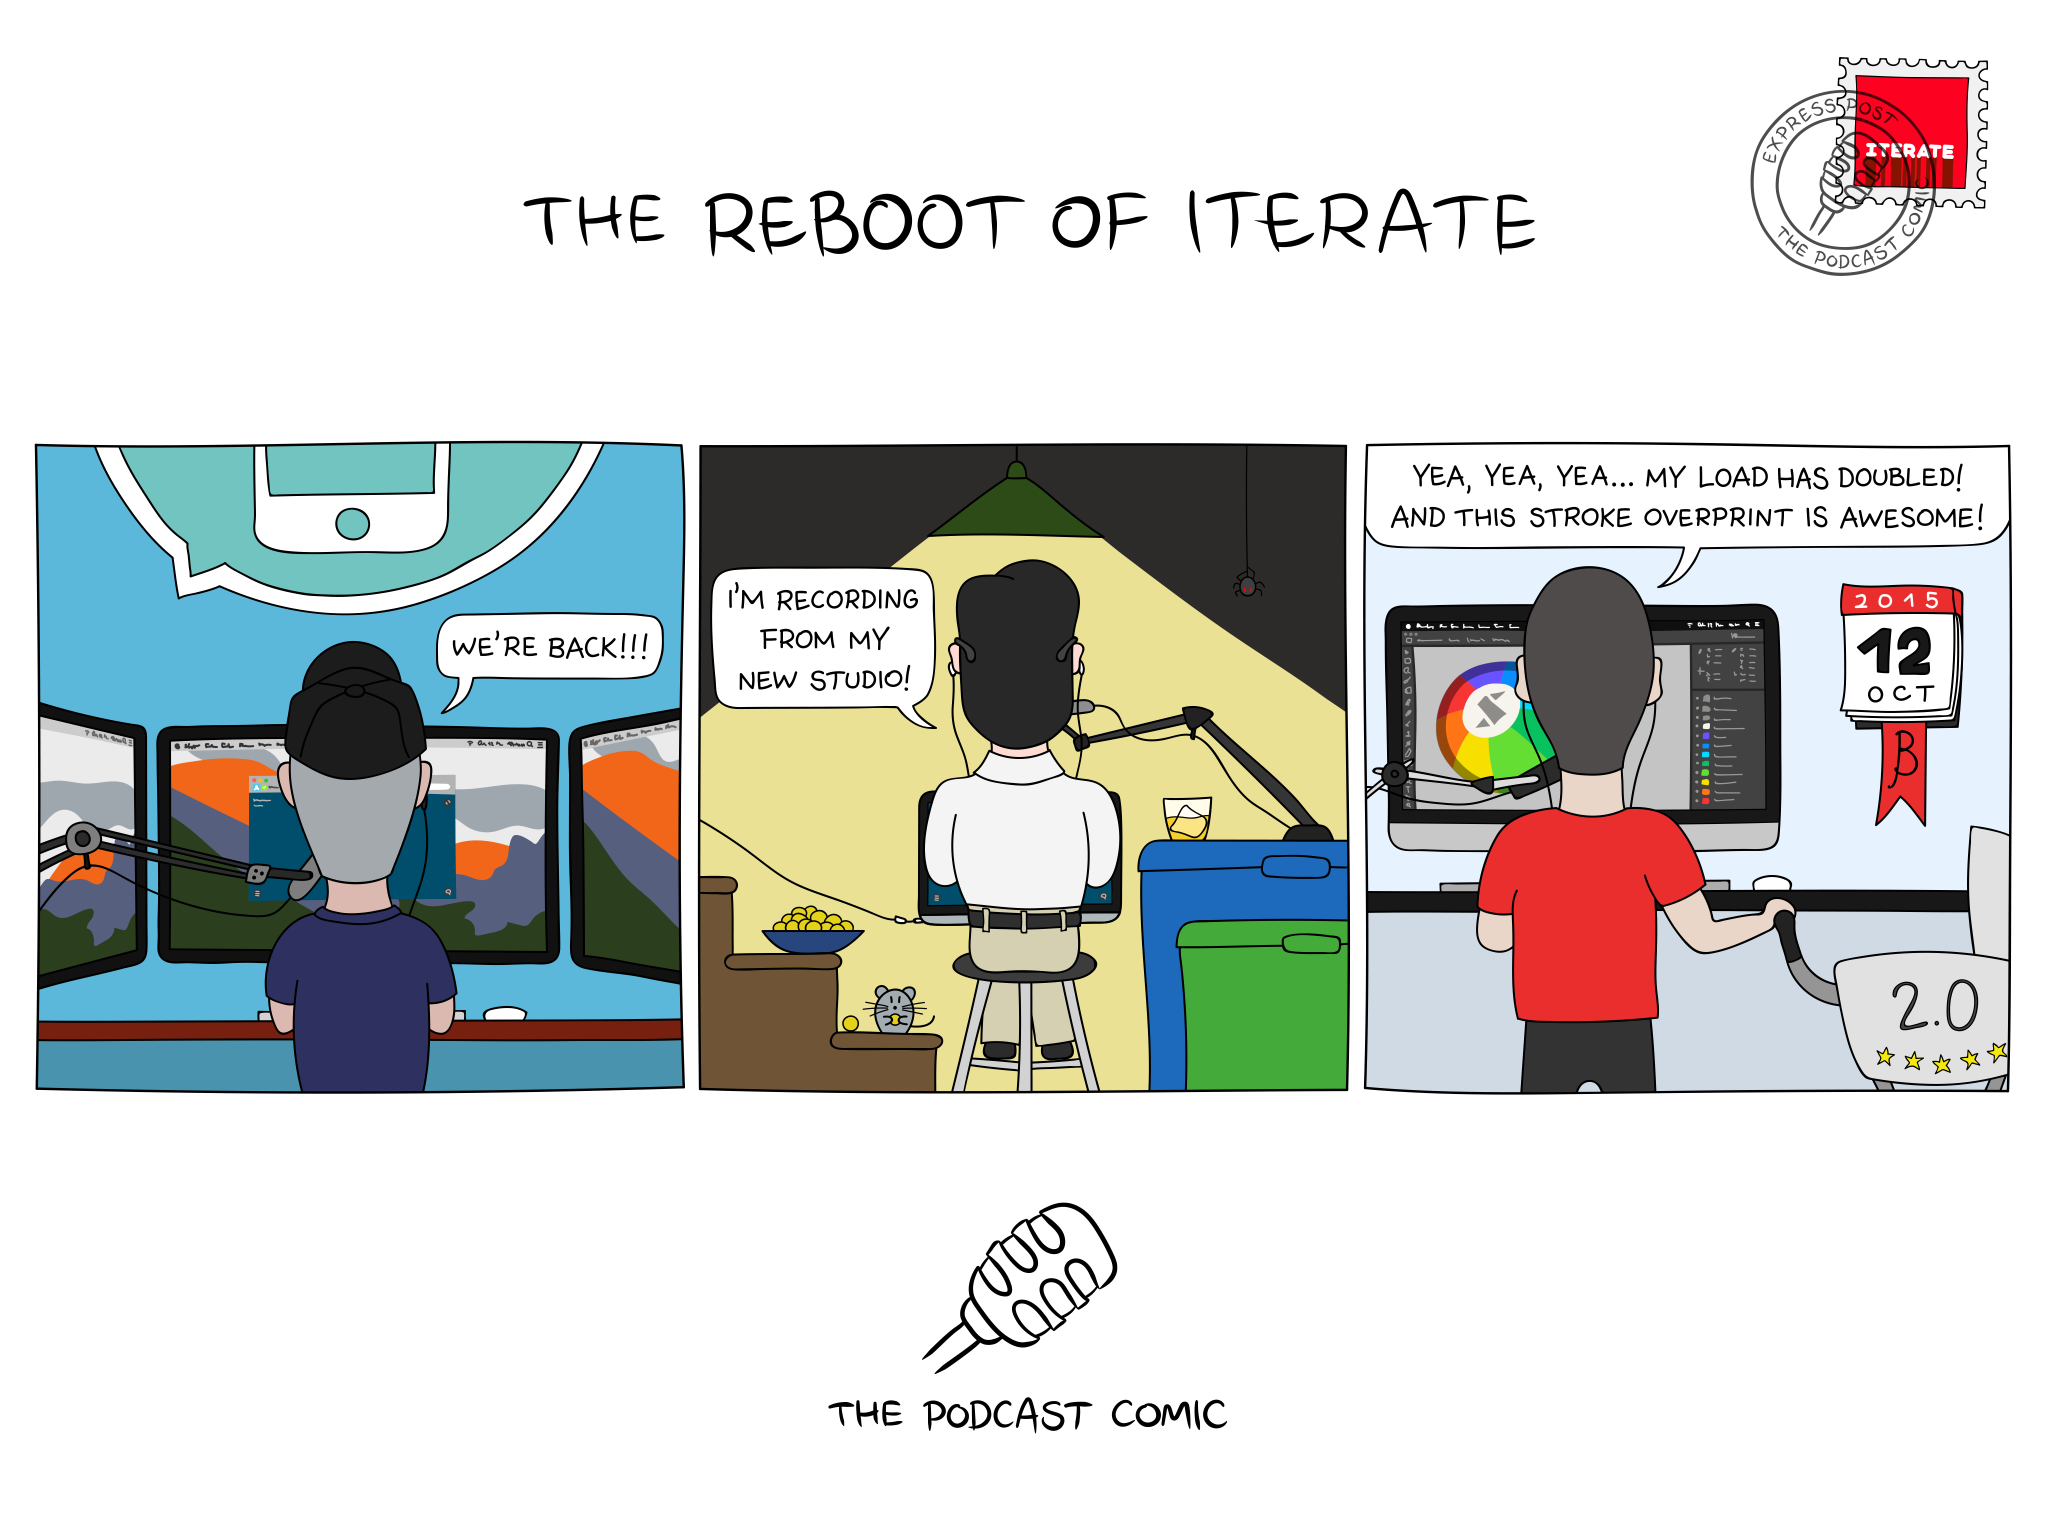 Comic 'The Reboot of Iterate'